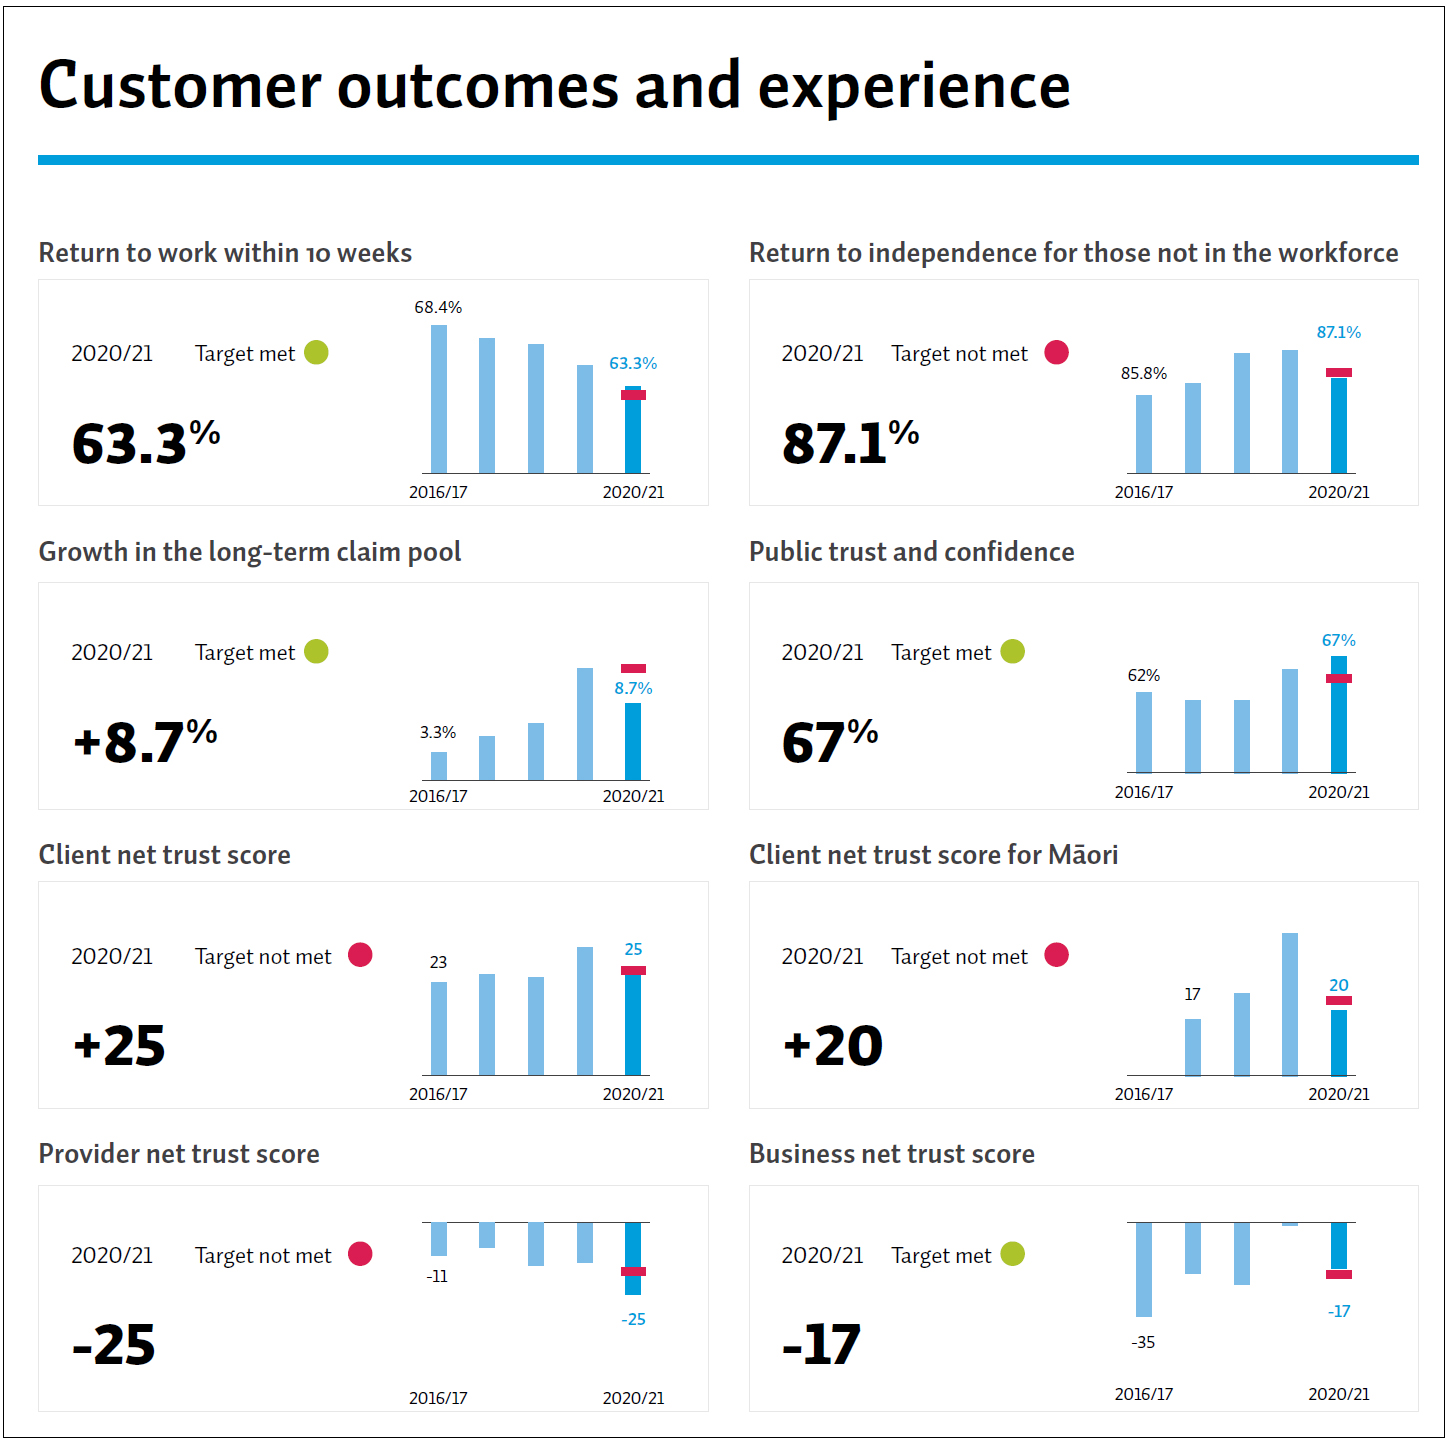 Infographic from the Accident Compensation Corporation’s 2020/21 Annual Report that shows measures of customer outcomes and experience.